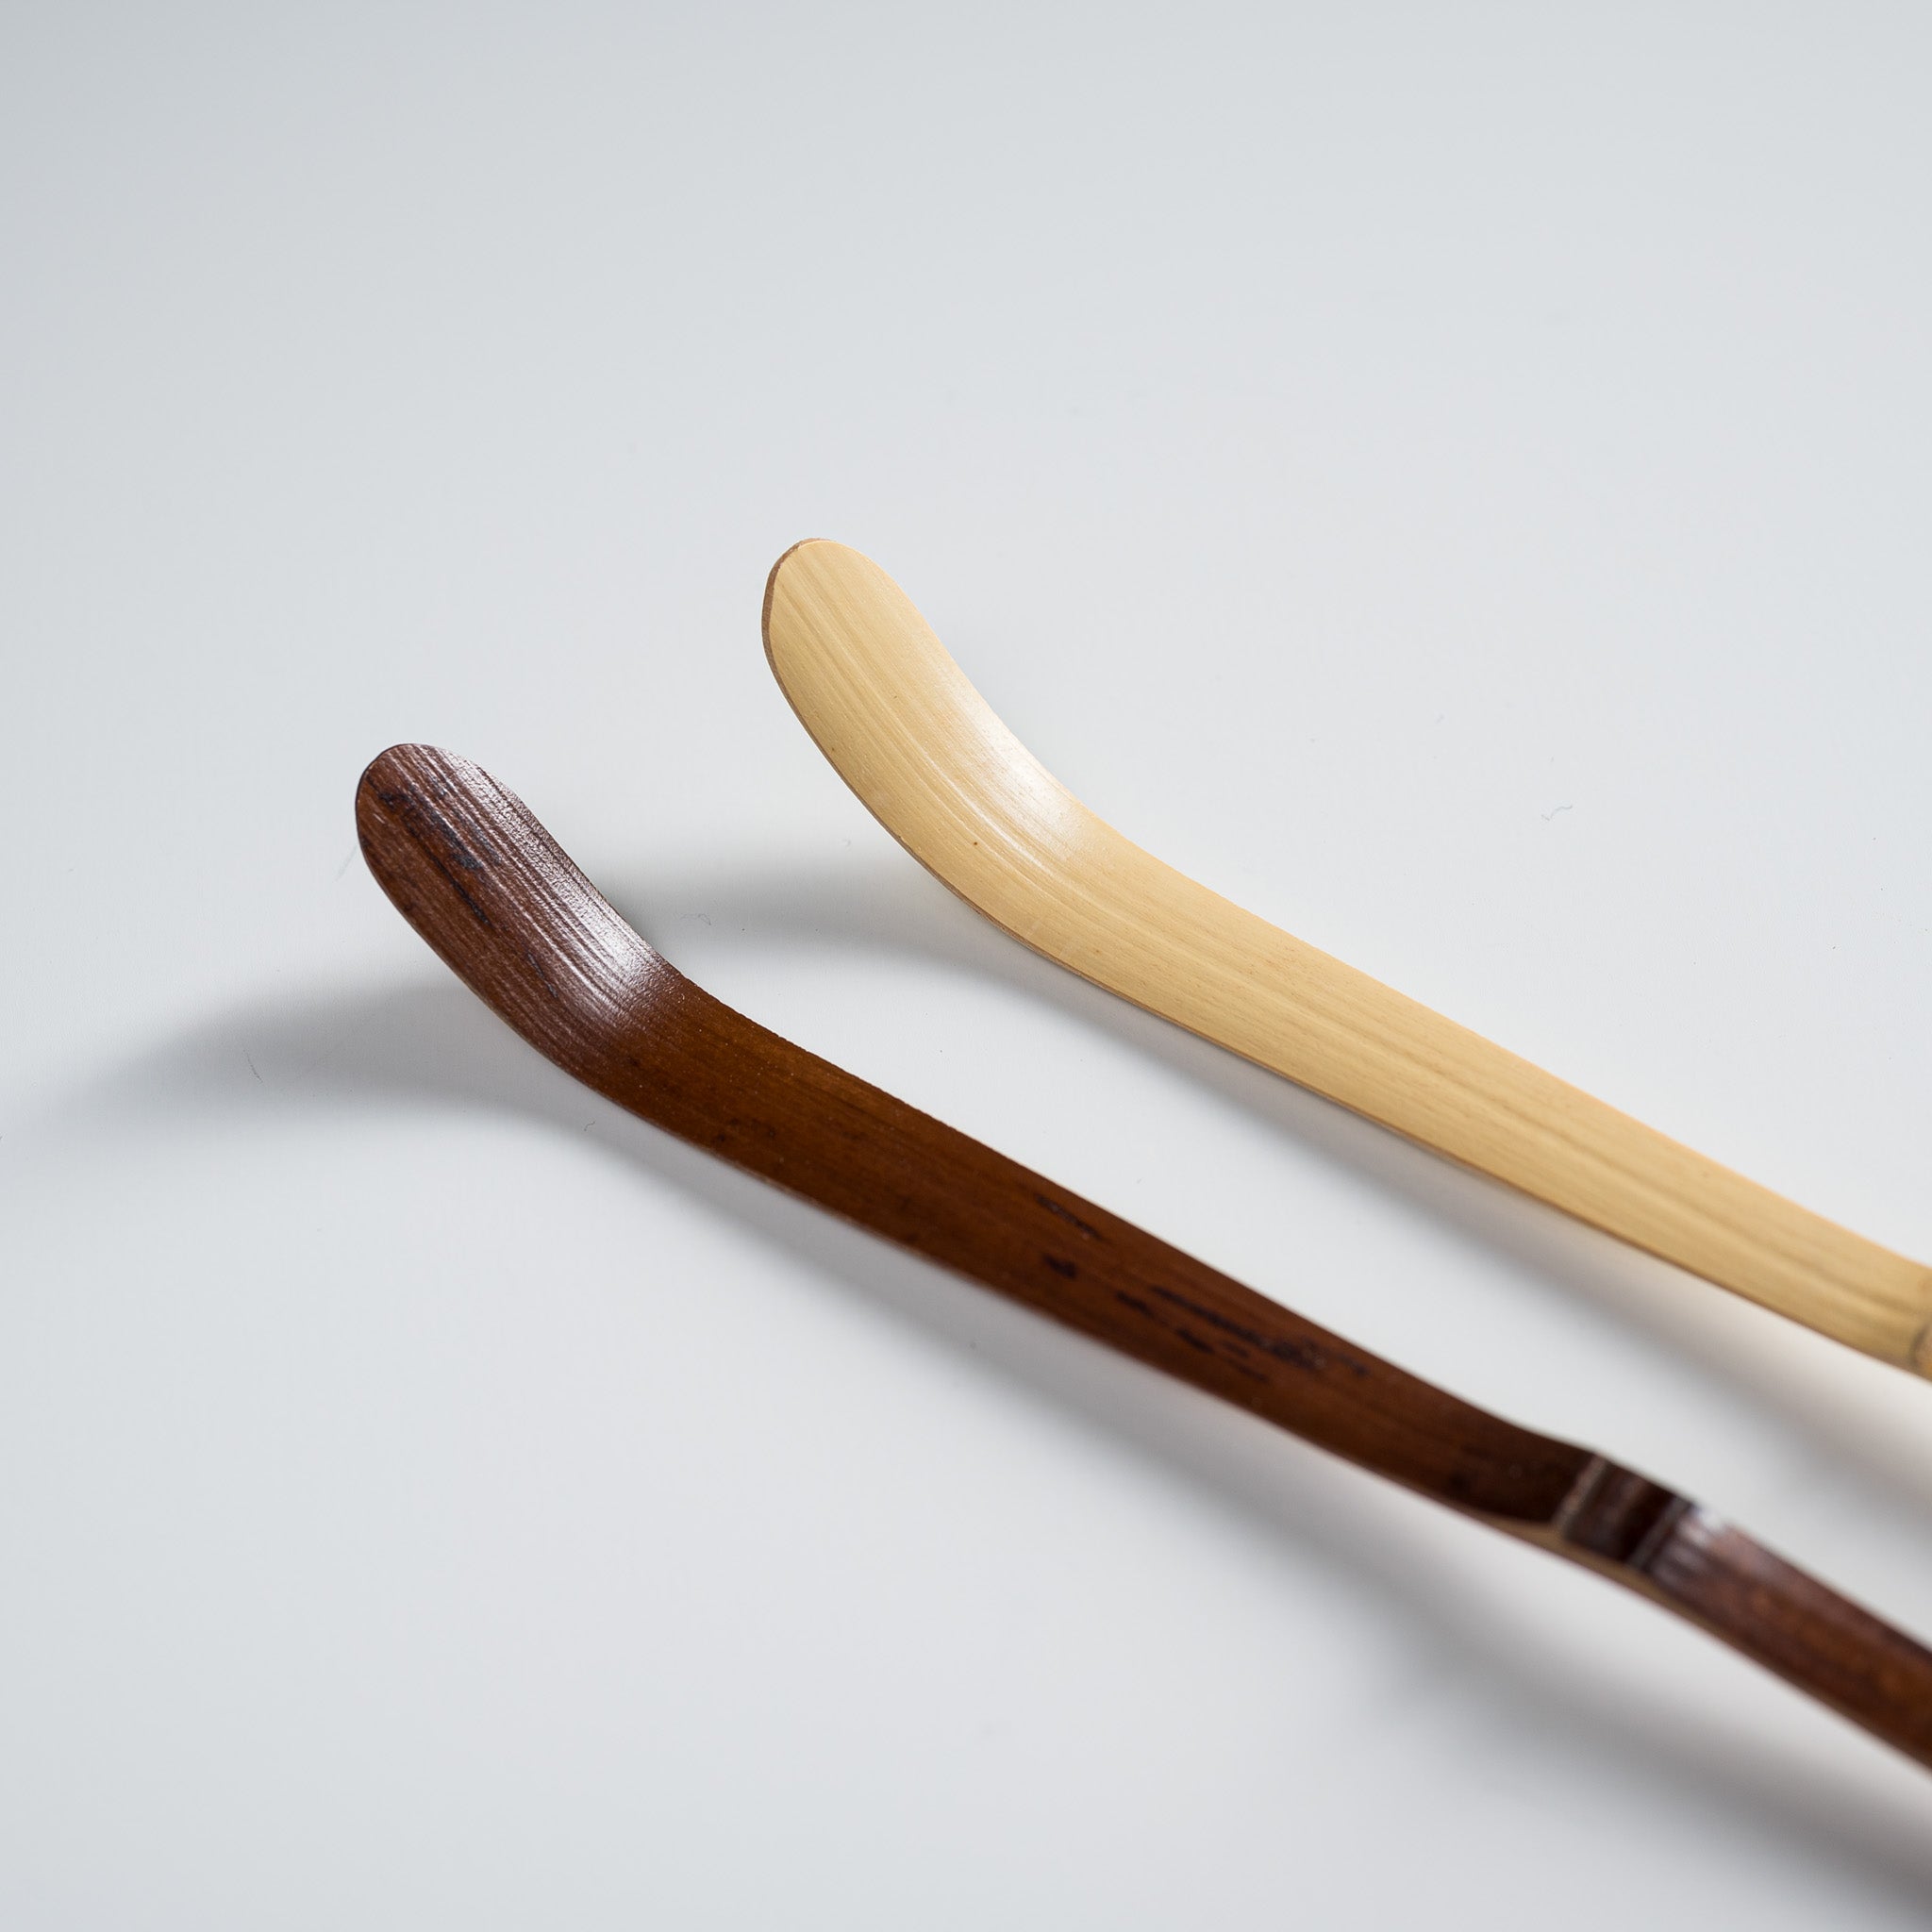 Crafted In Japan Matcha Spoon - Black Bamboo / 茶匙